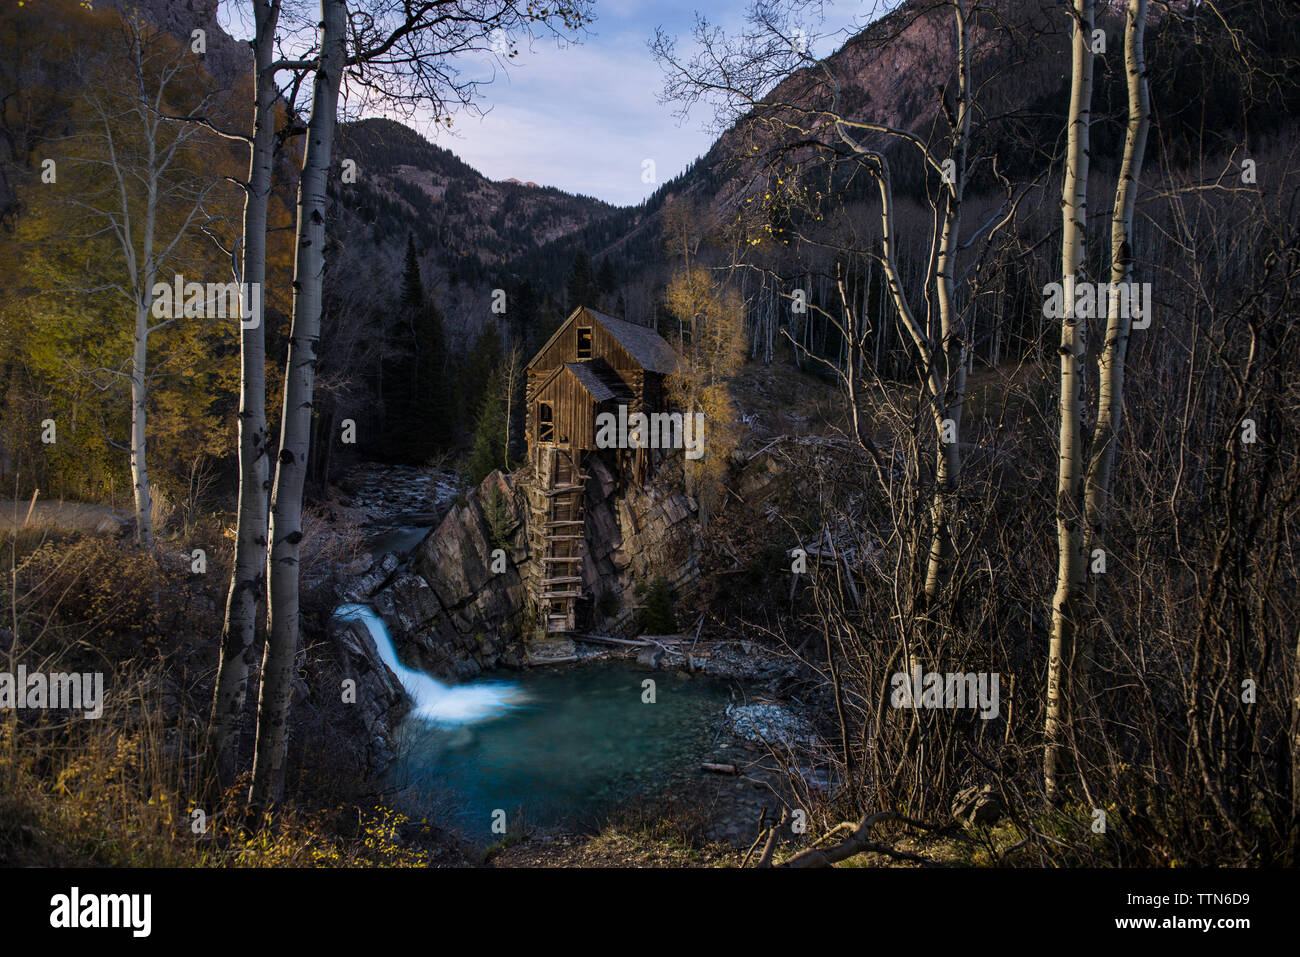 View of Crystal Mill against mountains Stock Photo